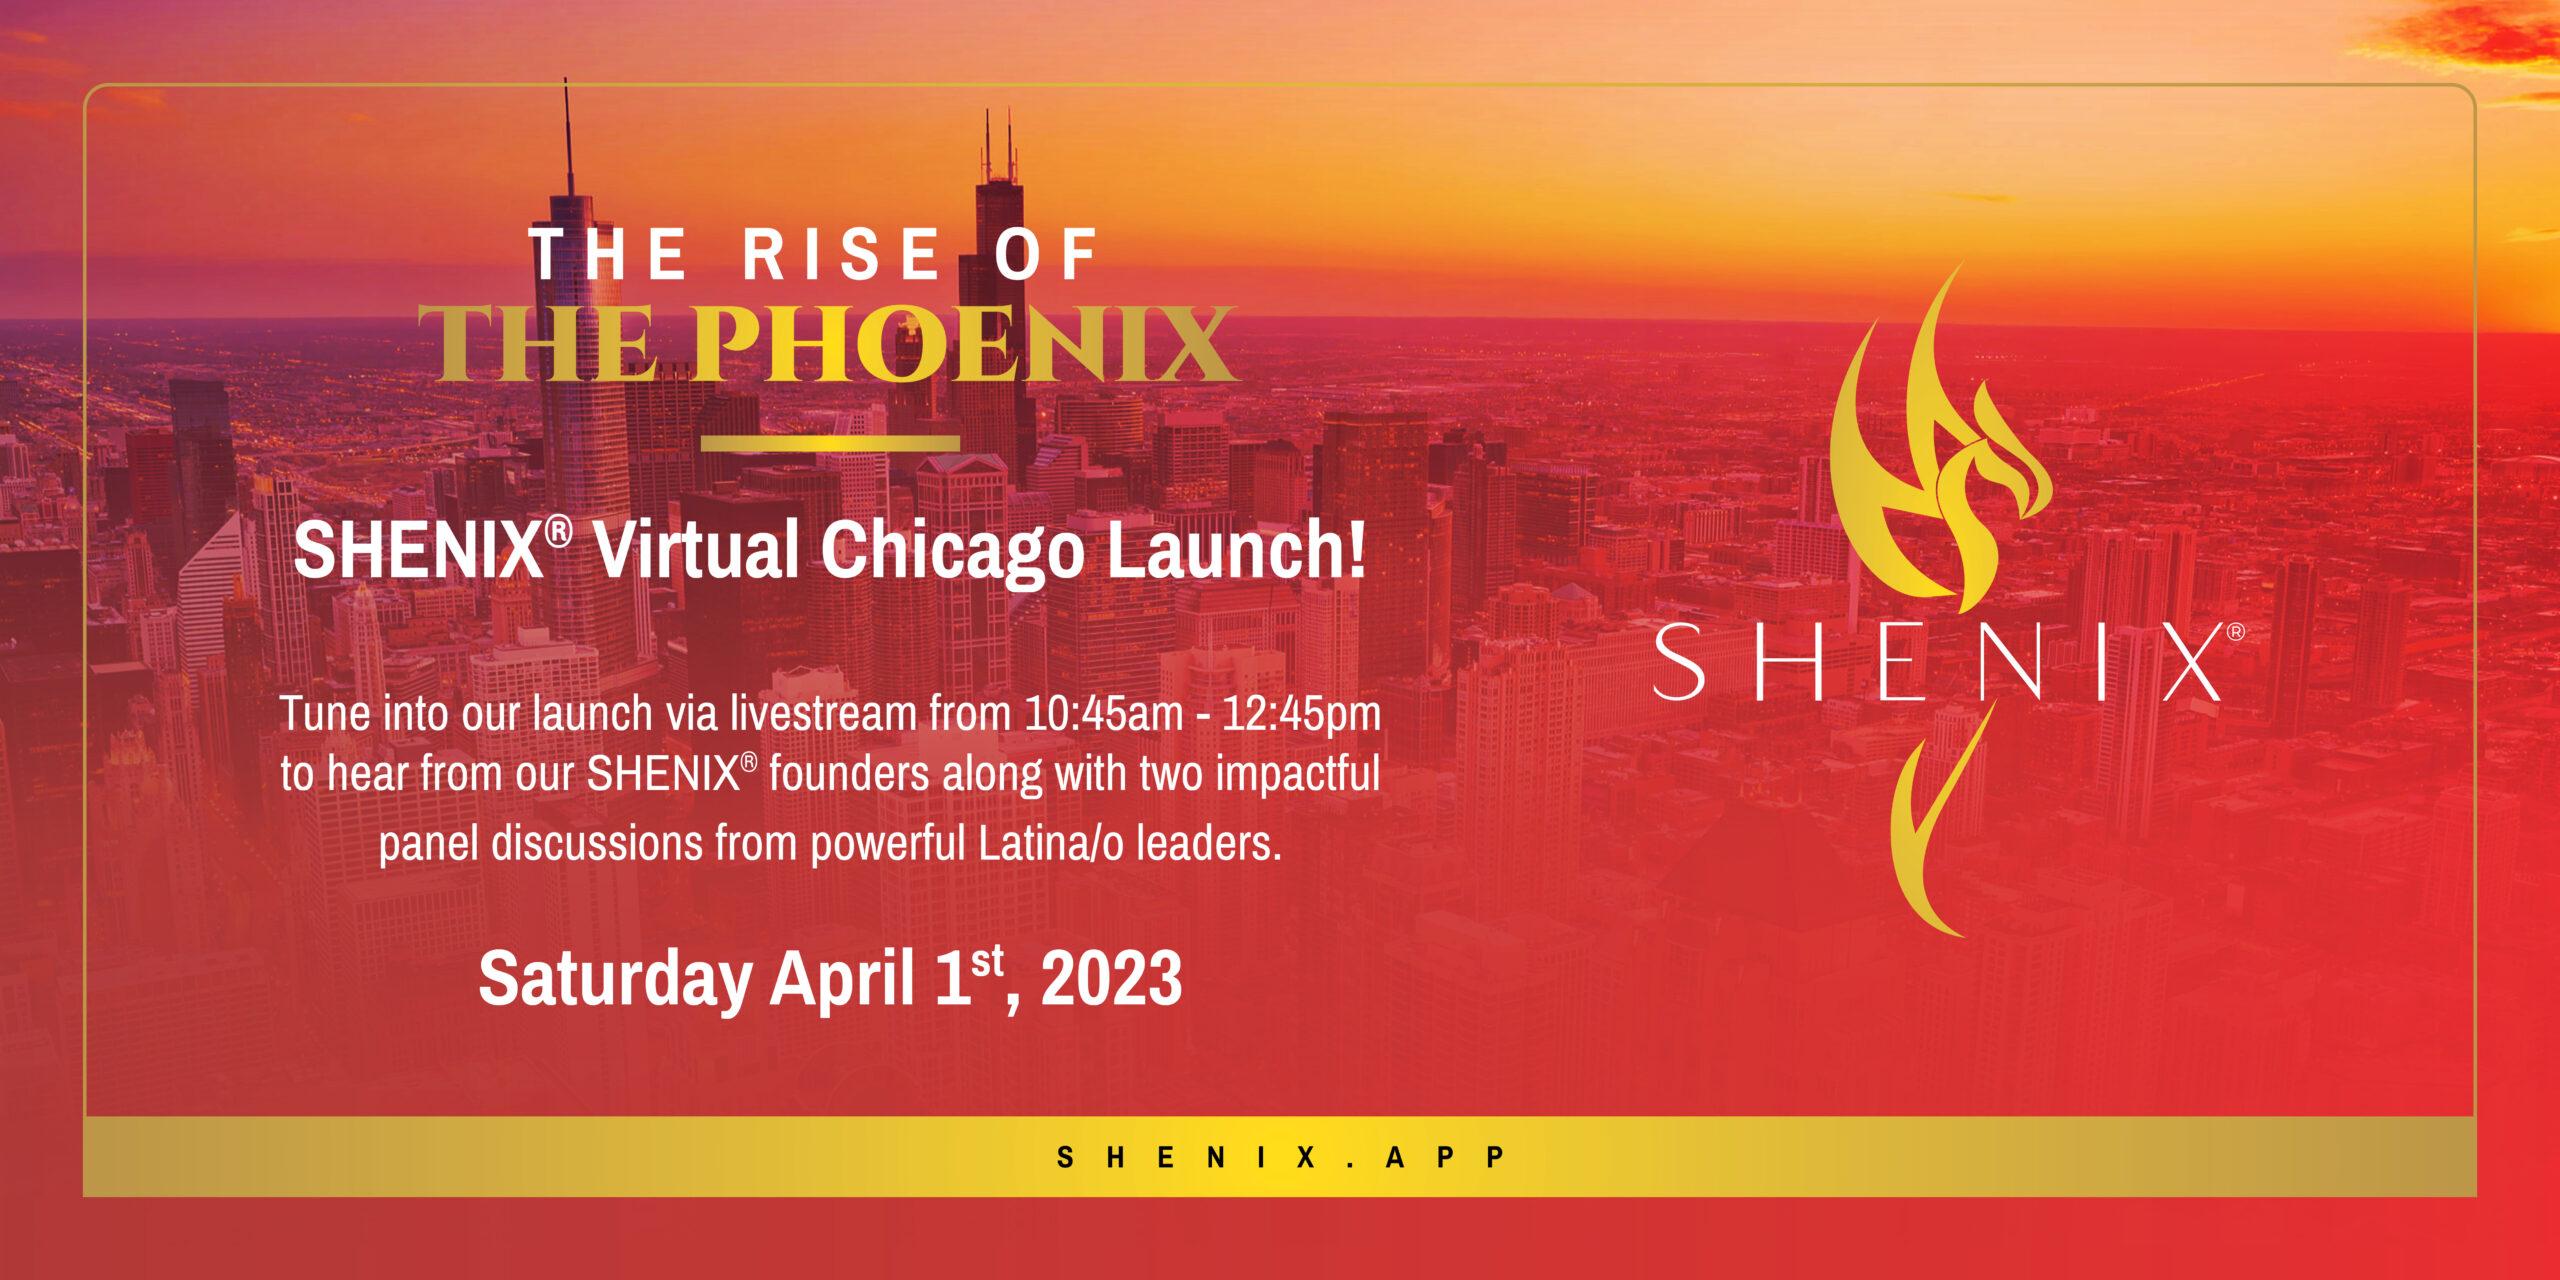 The Rise of the Phoenix Event on April 1, 2023